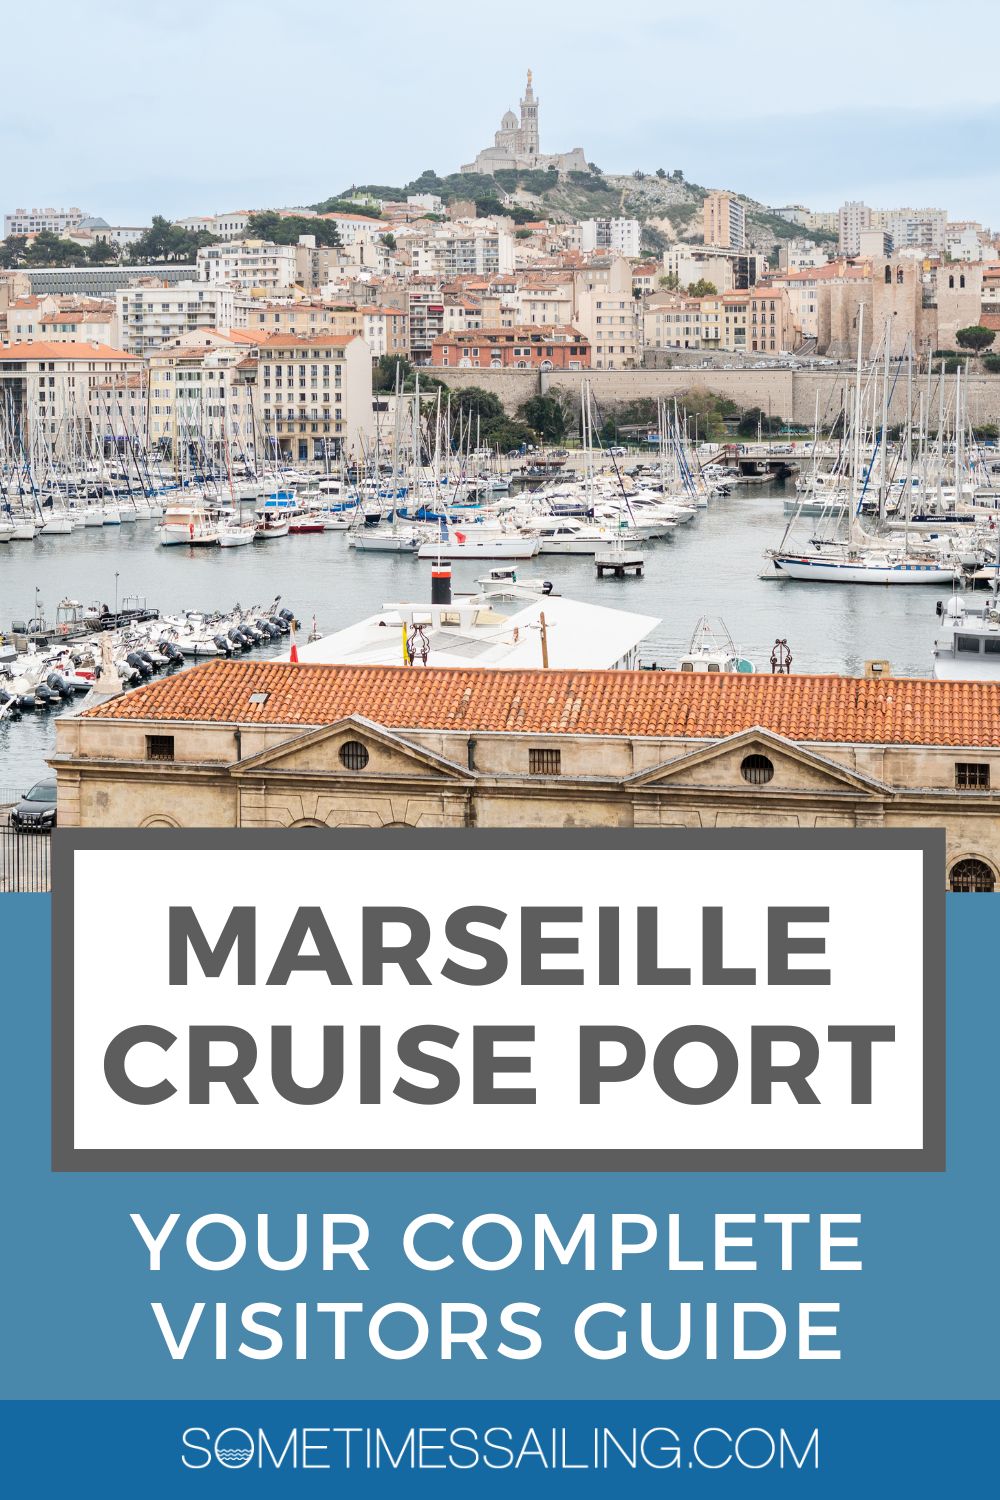 Marseille Cruise Port: Your Complete Visitors Guide, with a photo of the Marseille's Old Port.